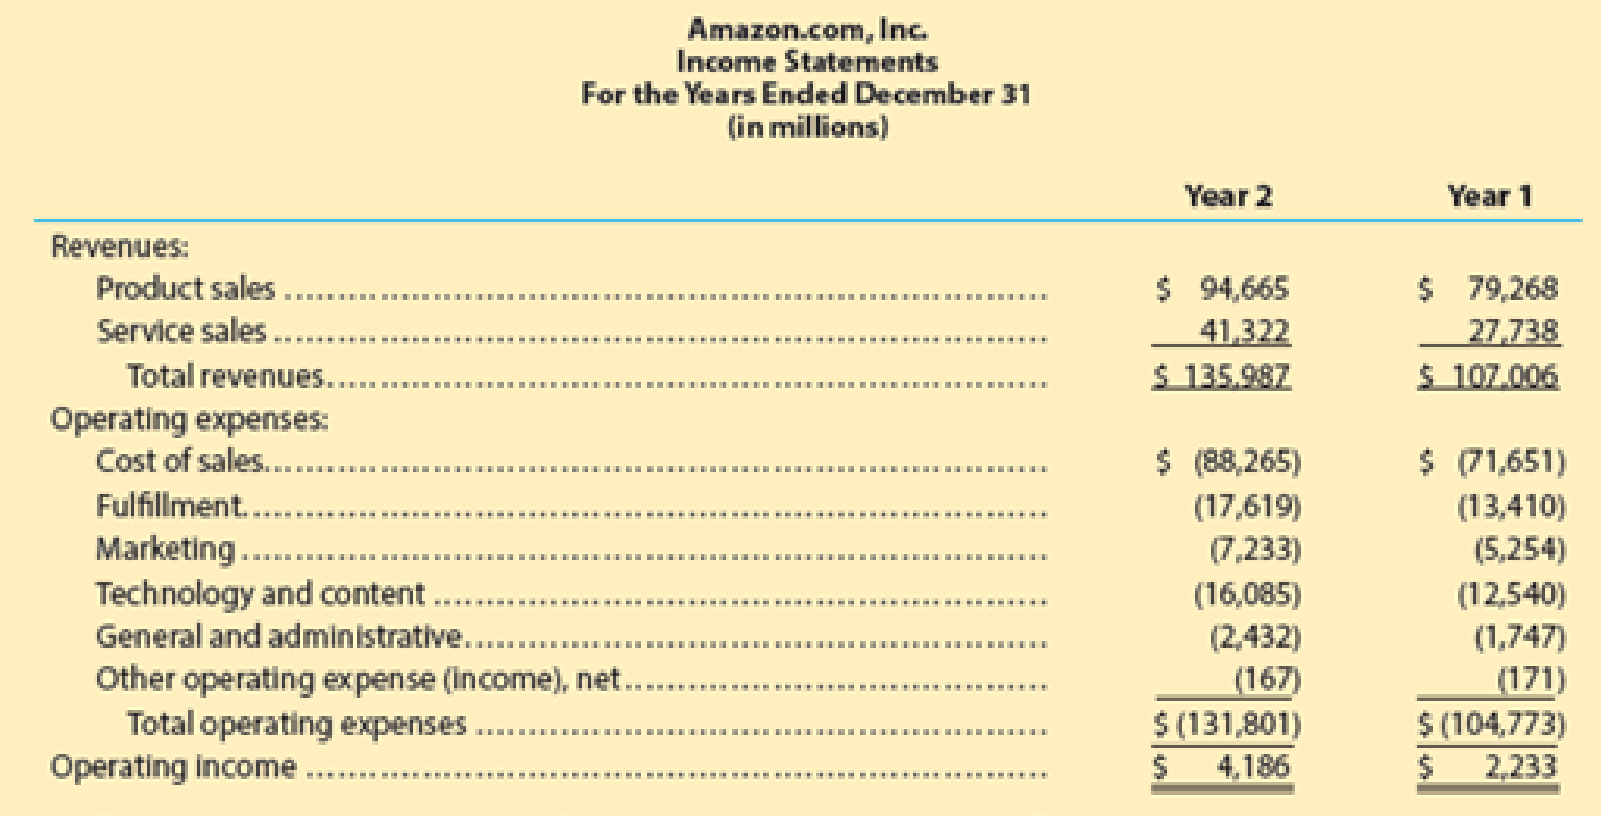 Chapter 3, Problem 1MAD, Analyze Amazon.com Amazon.com, Inc. (AMZN) is the largest Internet retailer in the United States. 